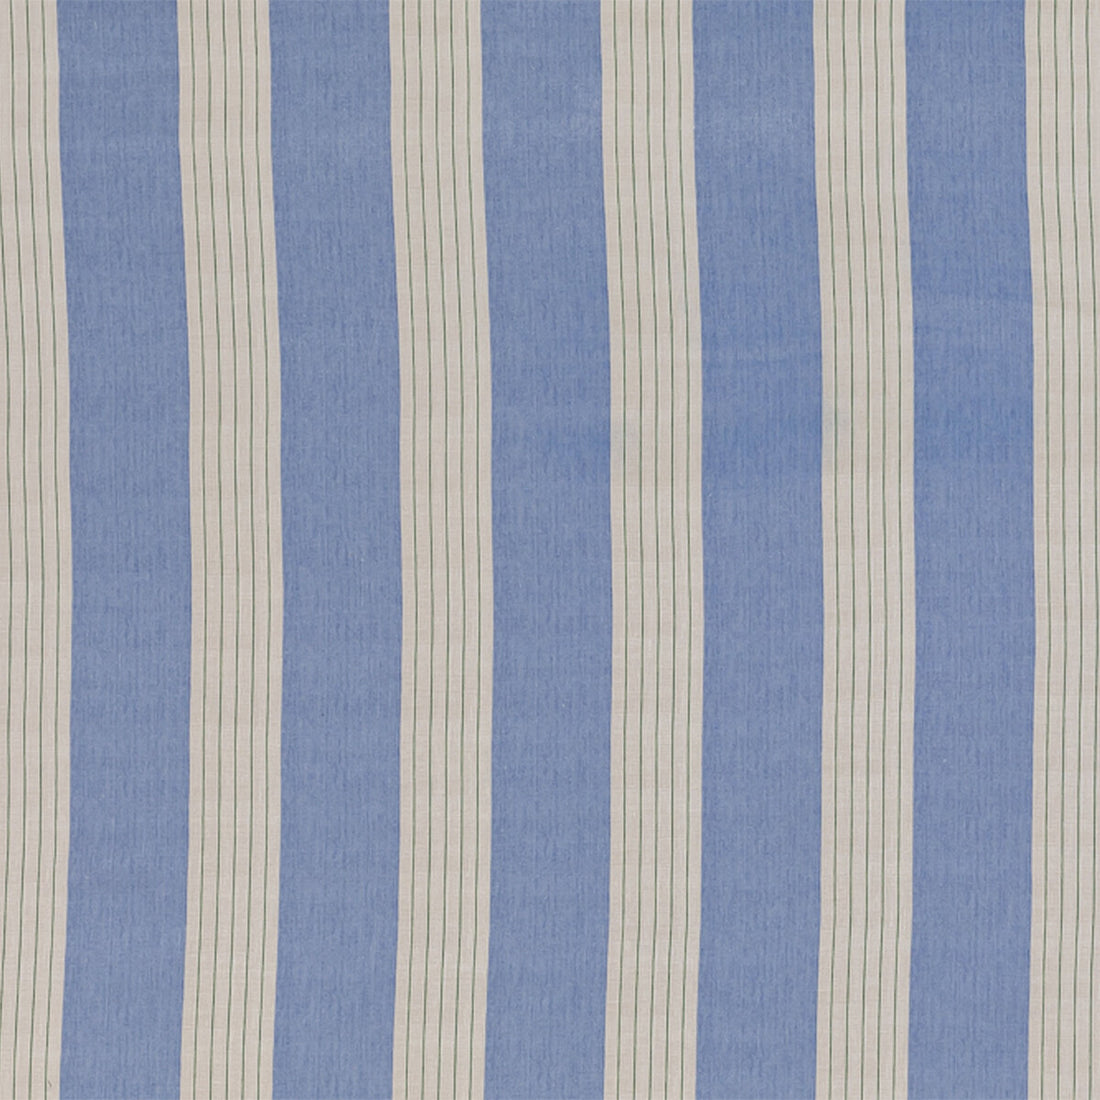 Lambert Stripe fabric in blue color - pattern BFC-3697.5.0 - by Lee Jofa in the Blithfield collection